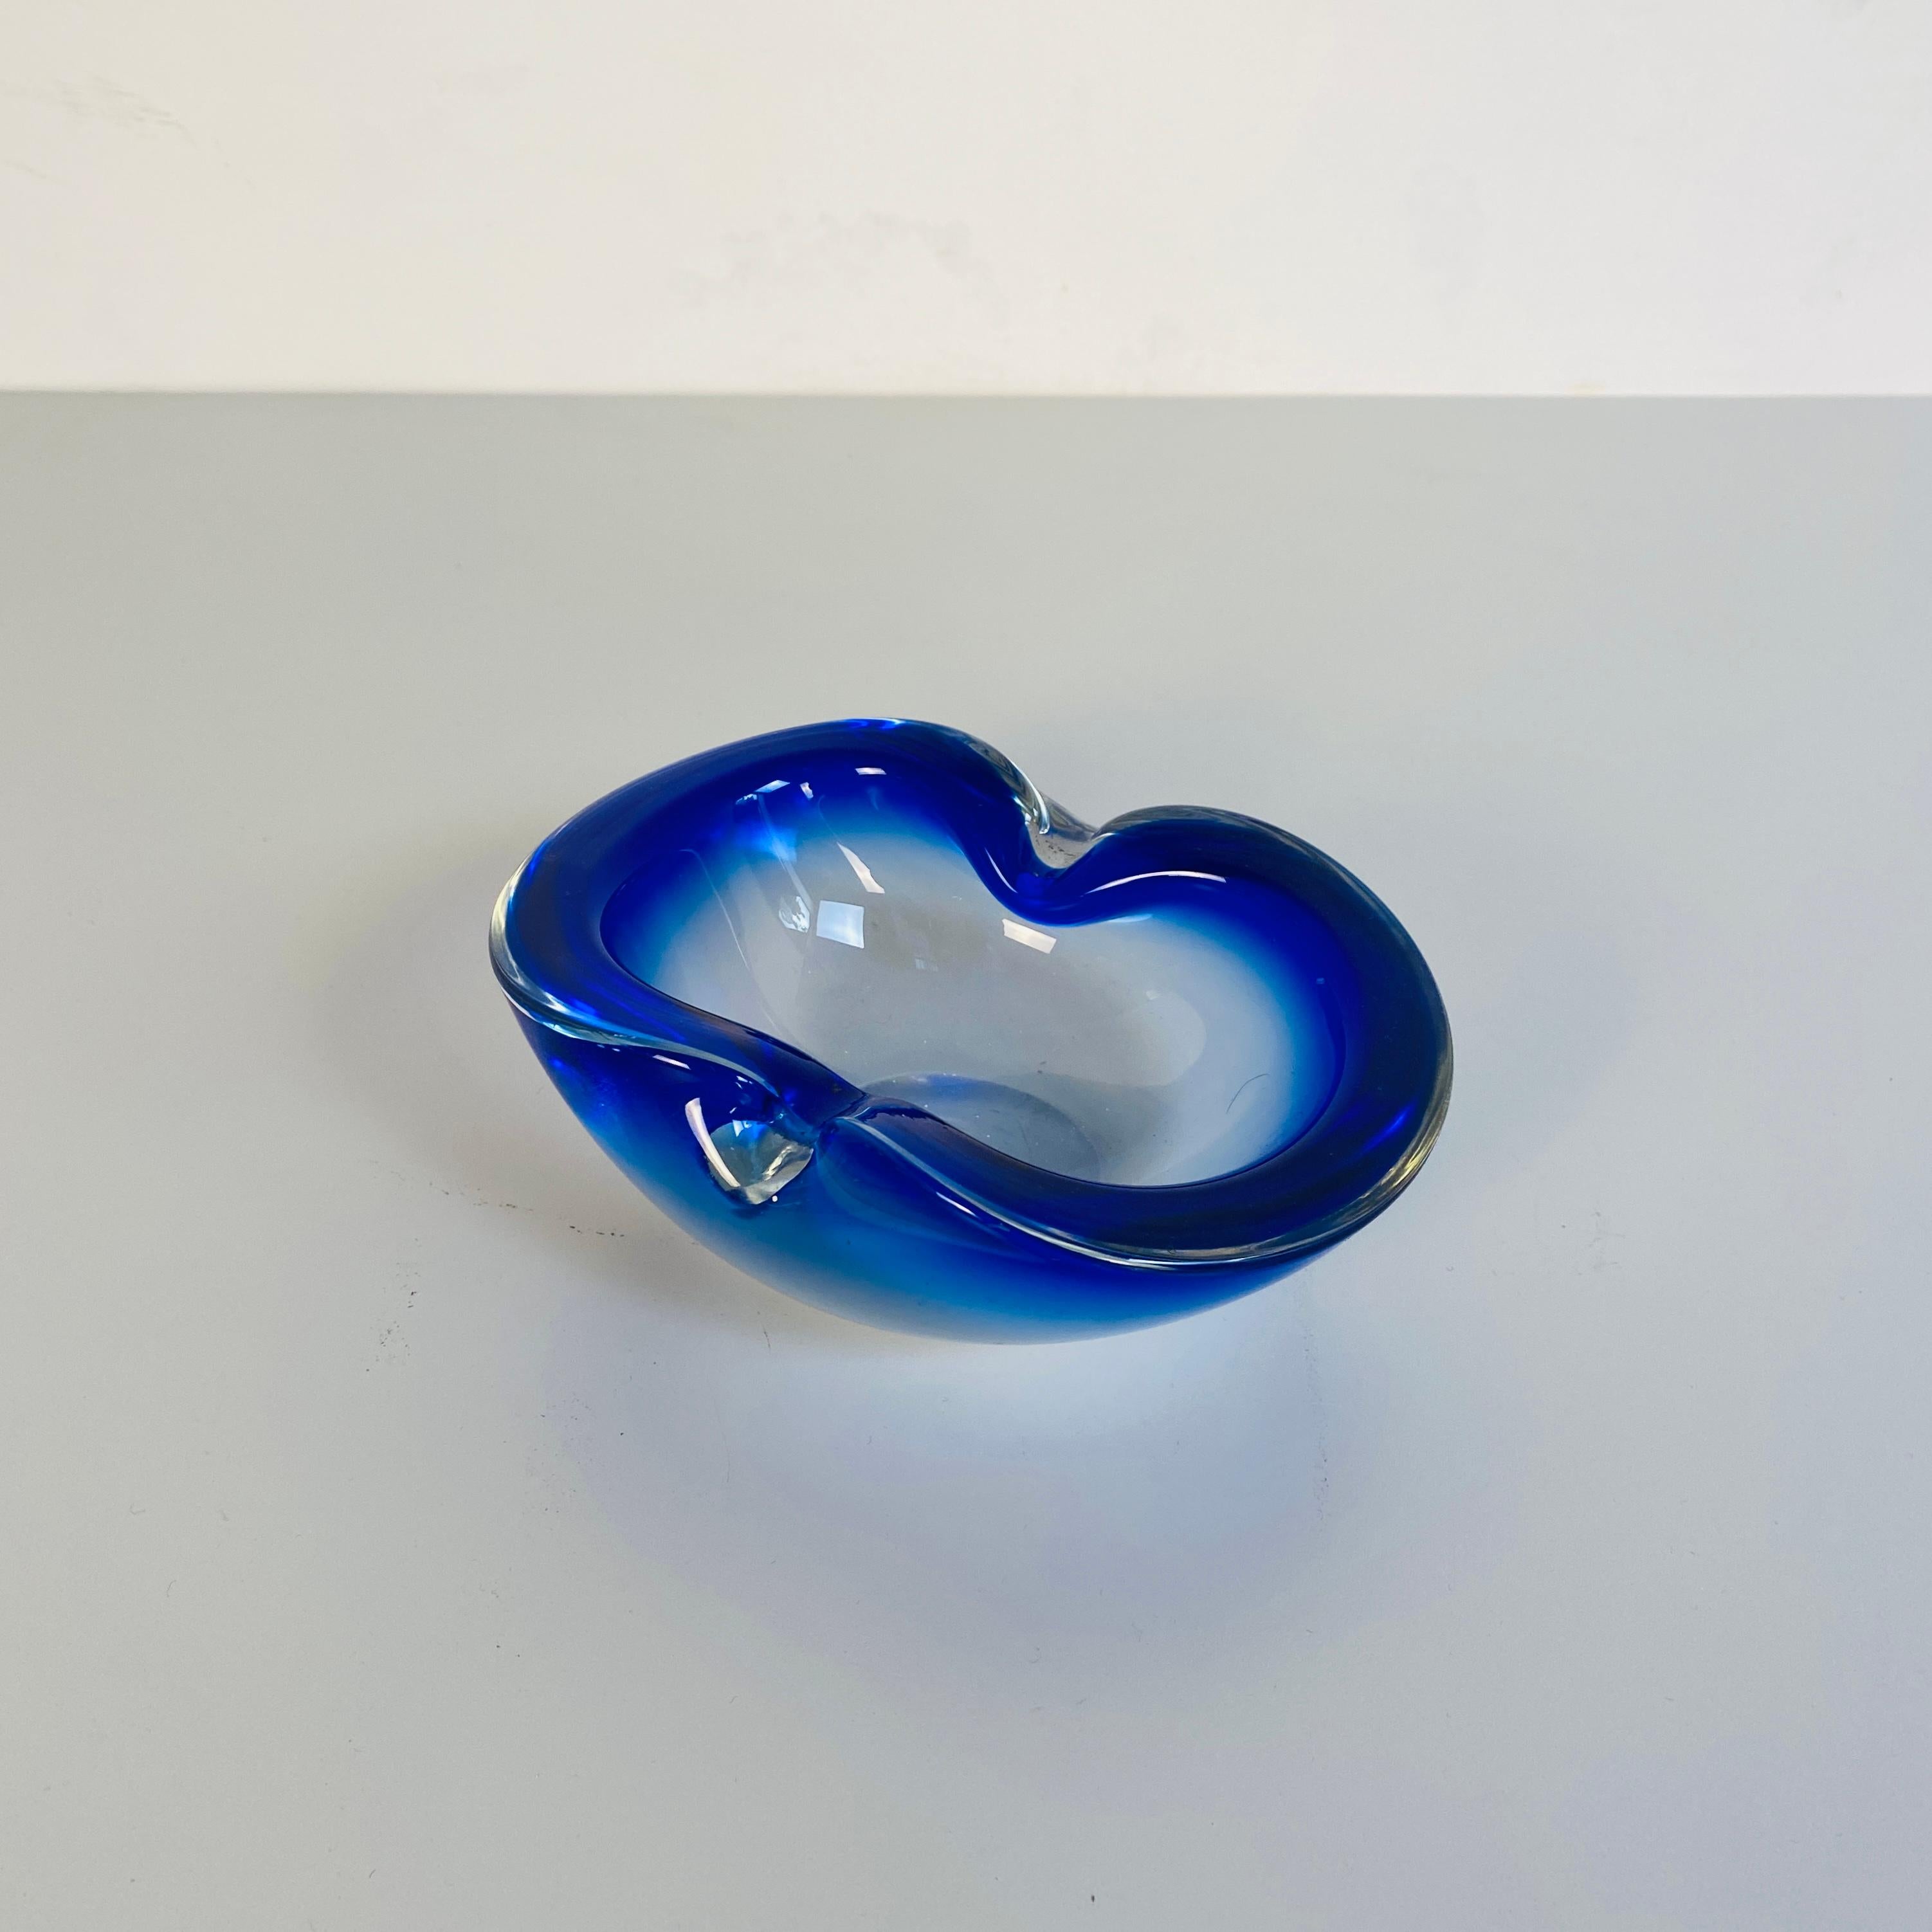 Italian Mid-Century Modern Murano Glass Oval Object Holder in Blue, 1970s In Good Condition For Sale In MIlano, IT